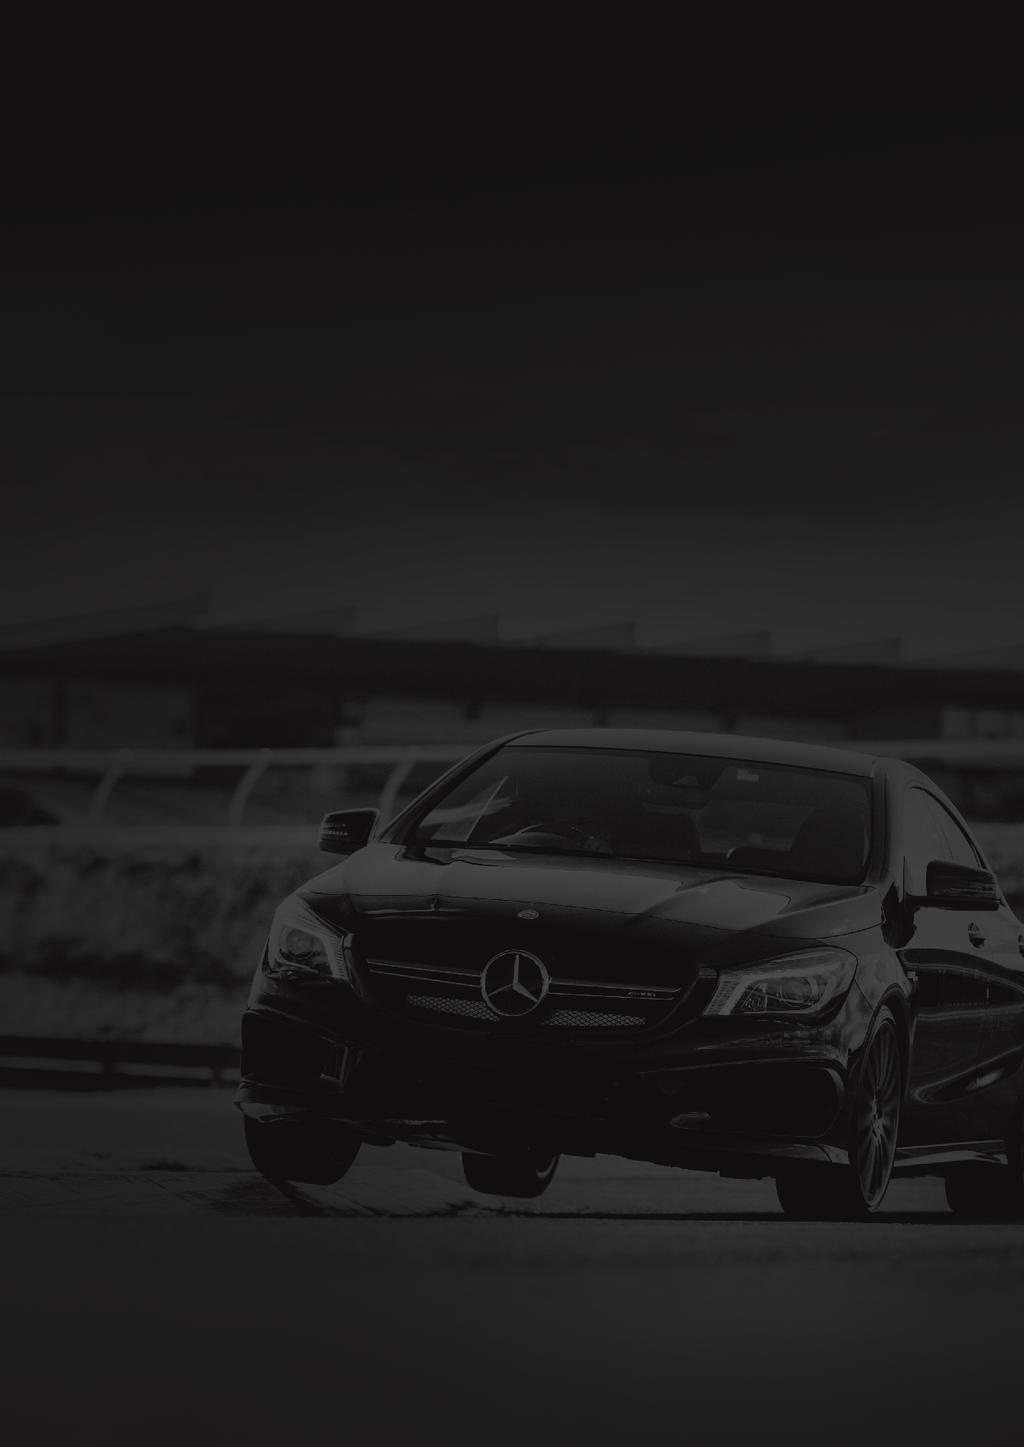 The Mercedes-Benz Driving Academy is dedicated to driving excellence and committed to road safety.